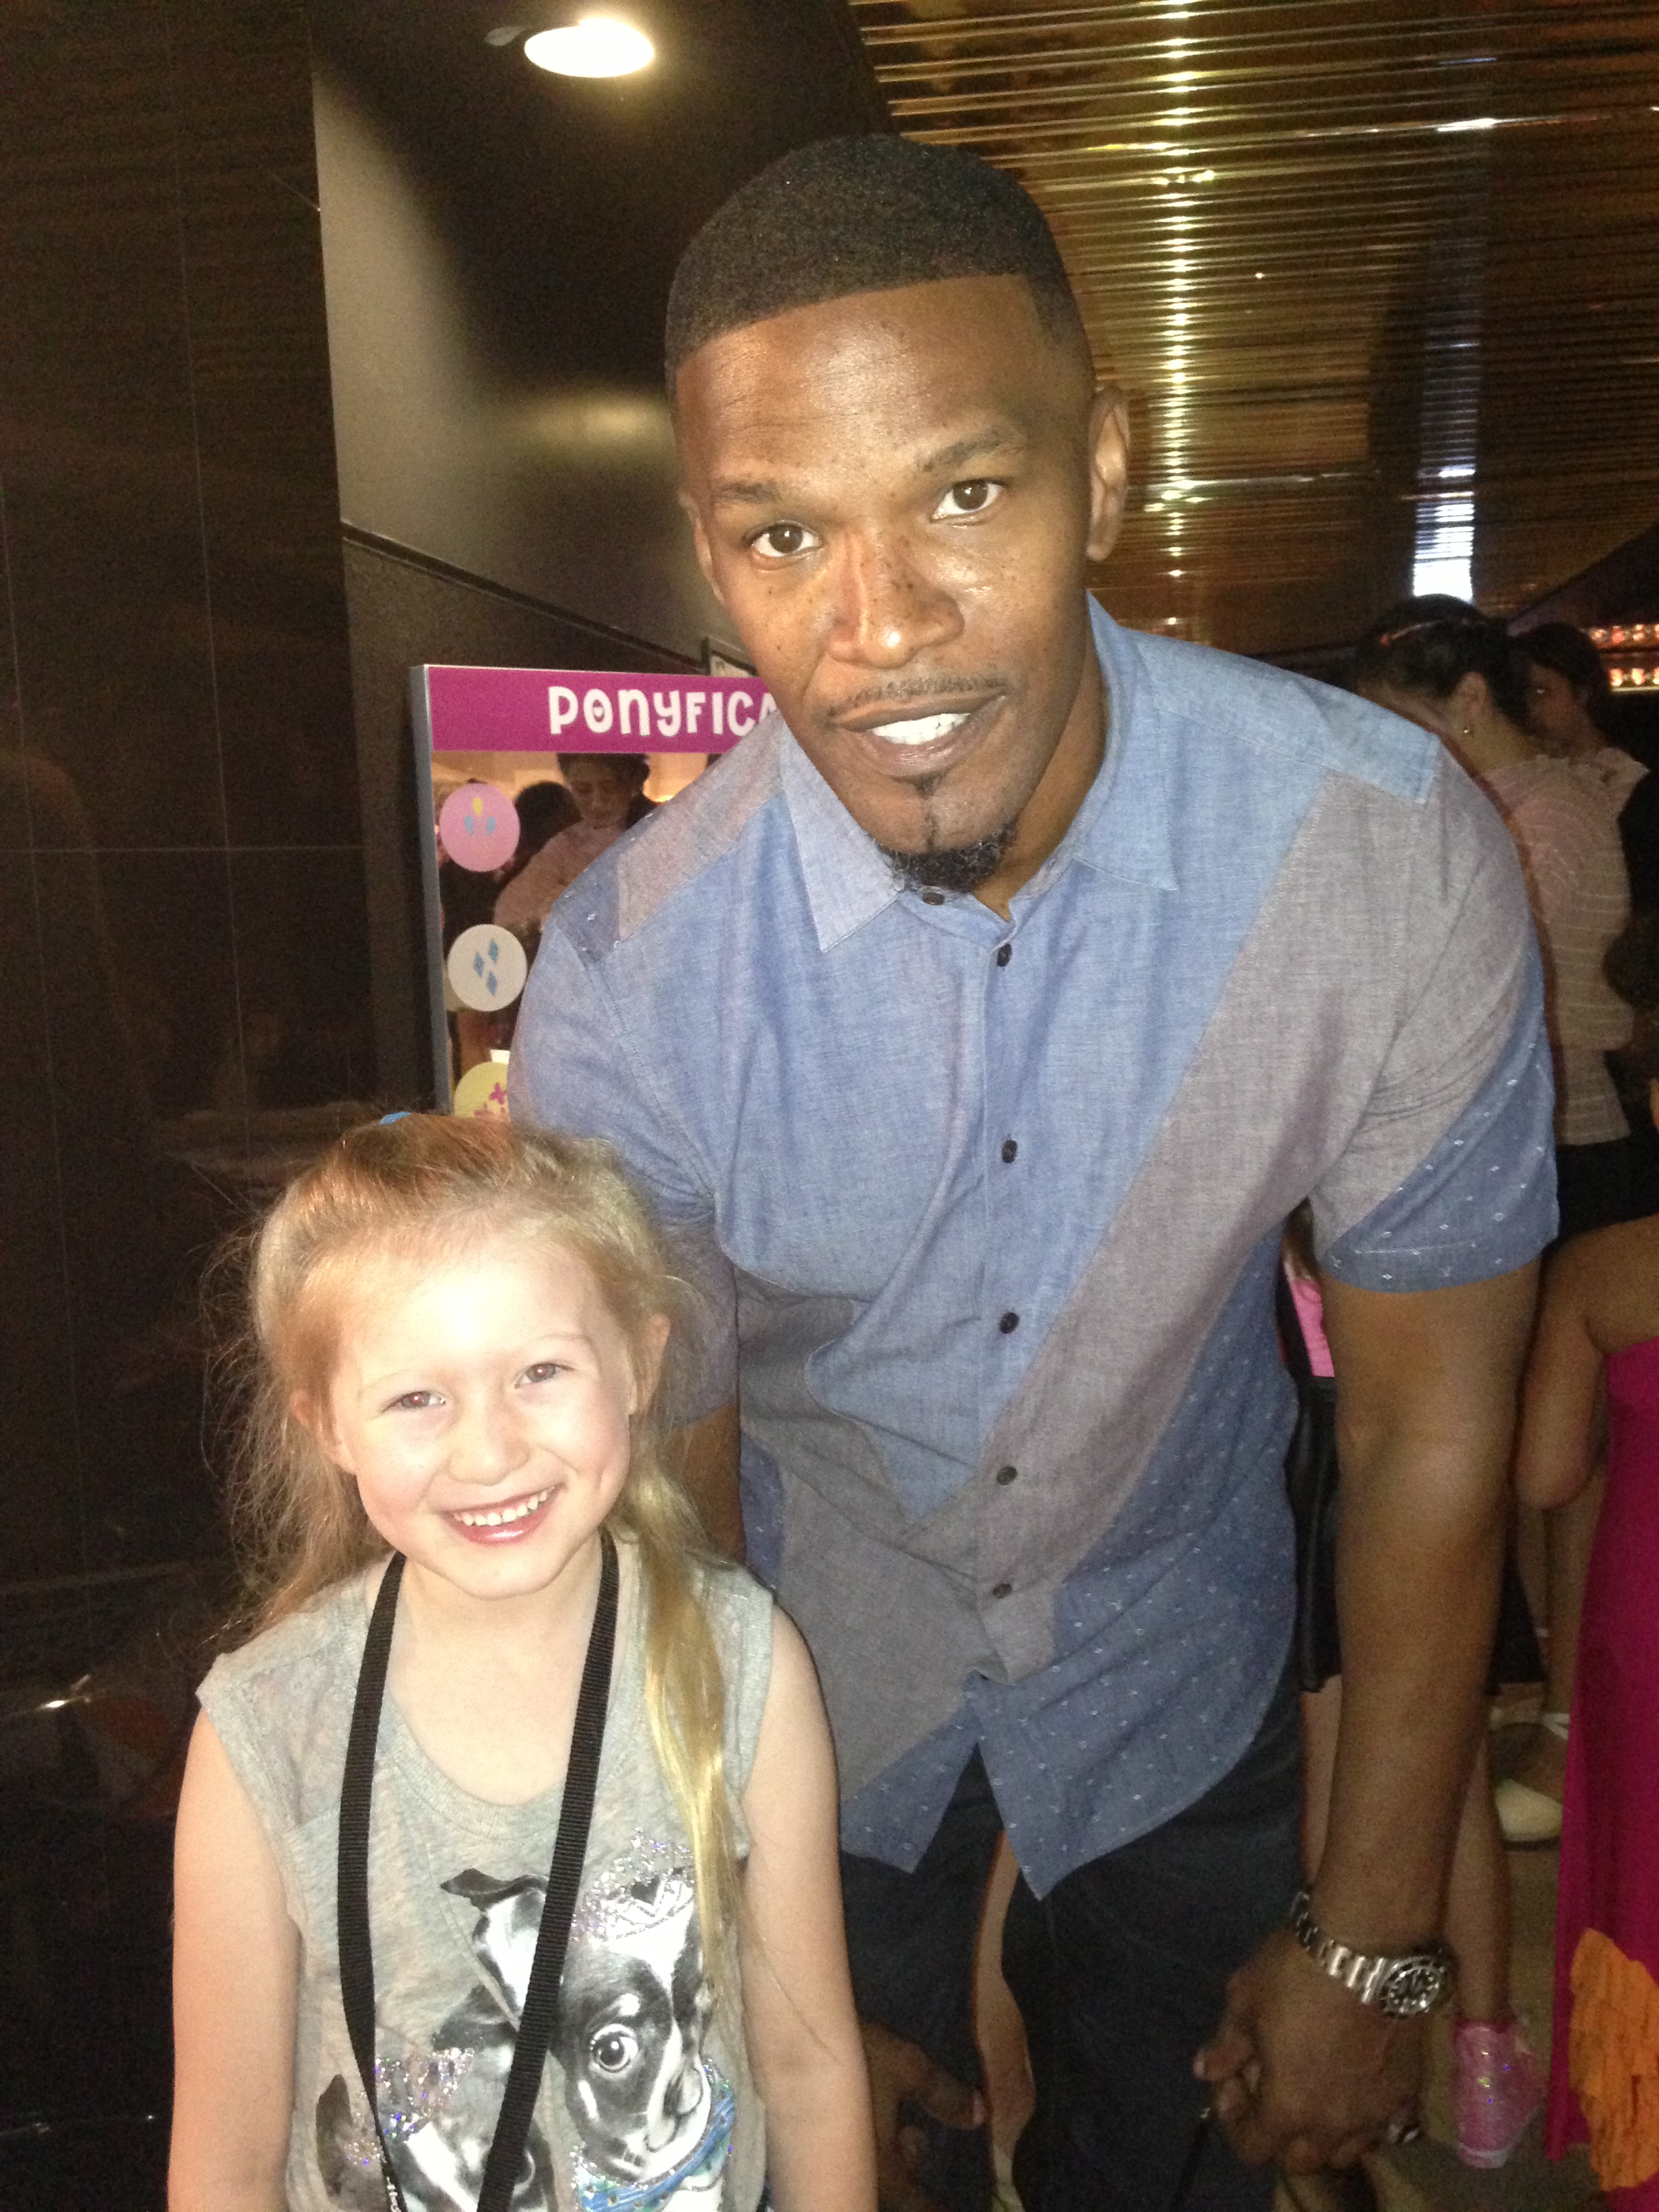 Jamie Fox. HOLLYWOOD, CA - SEPTEMBER 27: Abigail Zoe Lewis attends the Premiere of My Little Pony Equestria Girls Rainbow Rocks (My Little Pony) at TCL Chinese Theatre on September 27, 2014 in Hollywood, California.